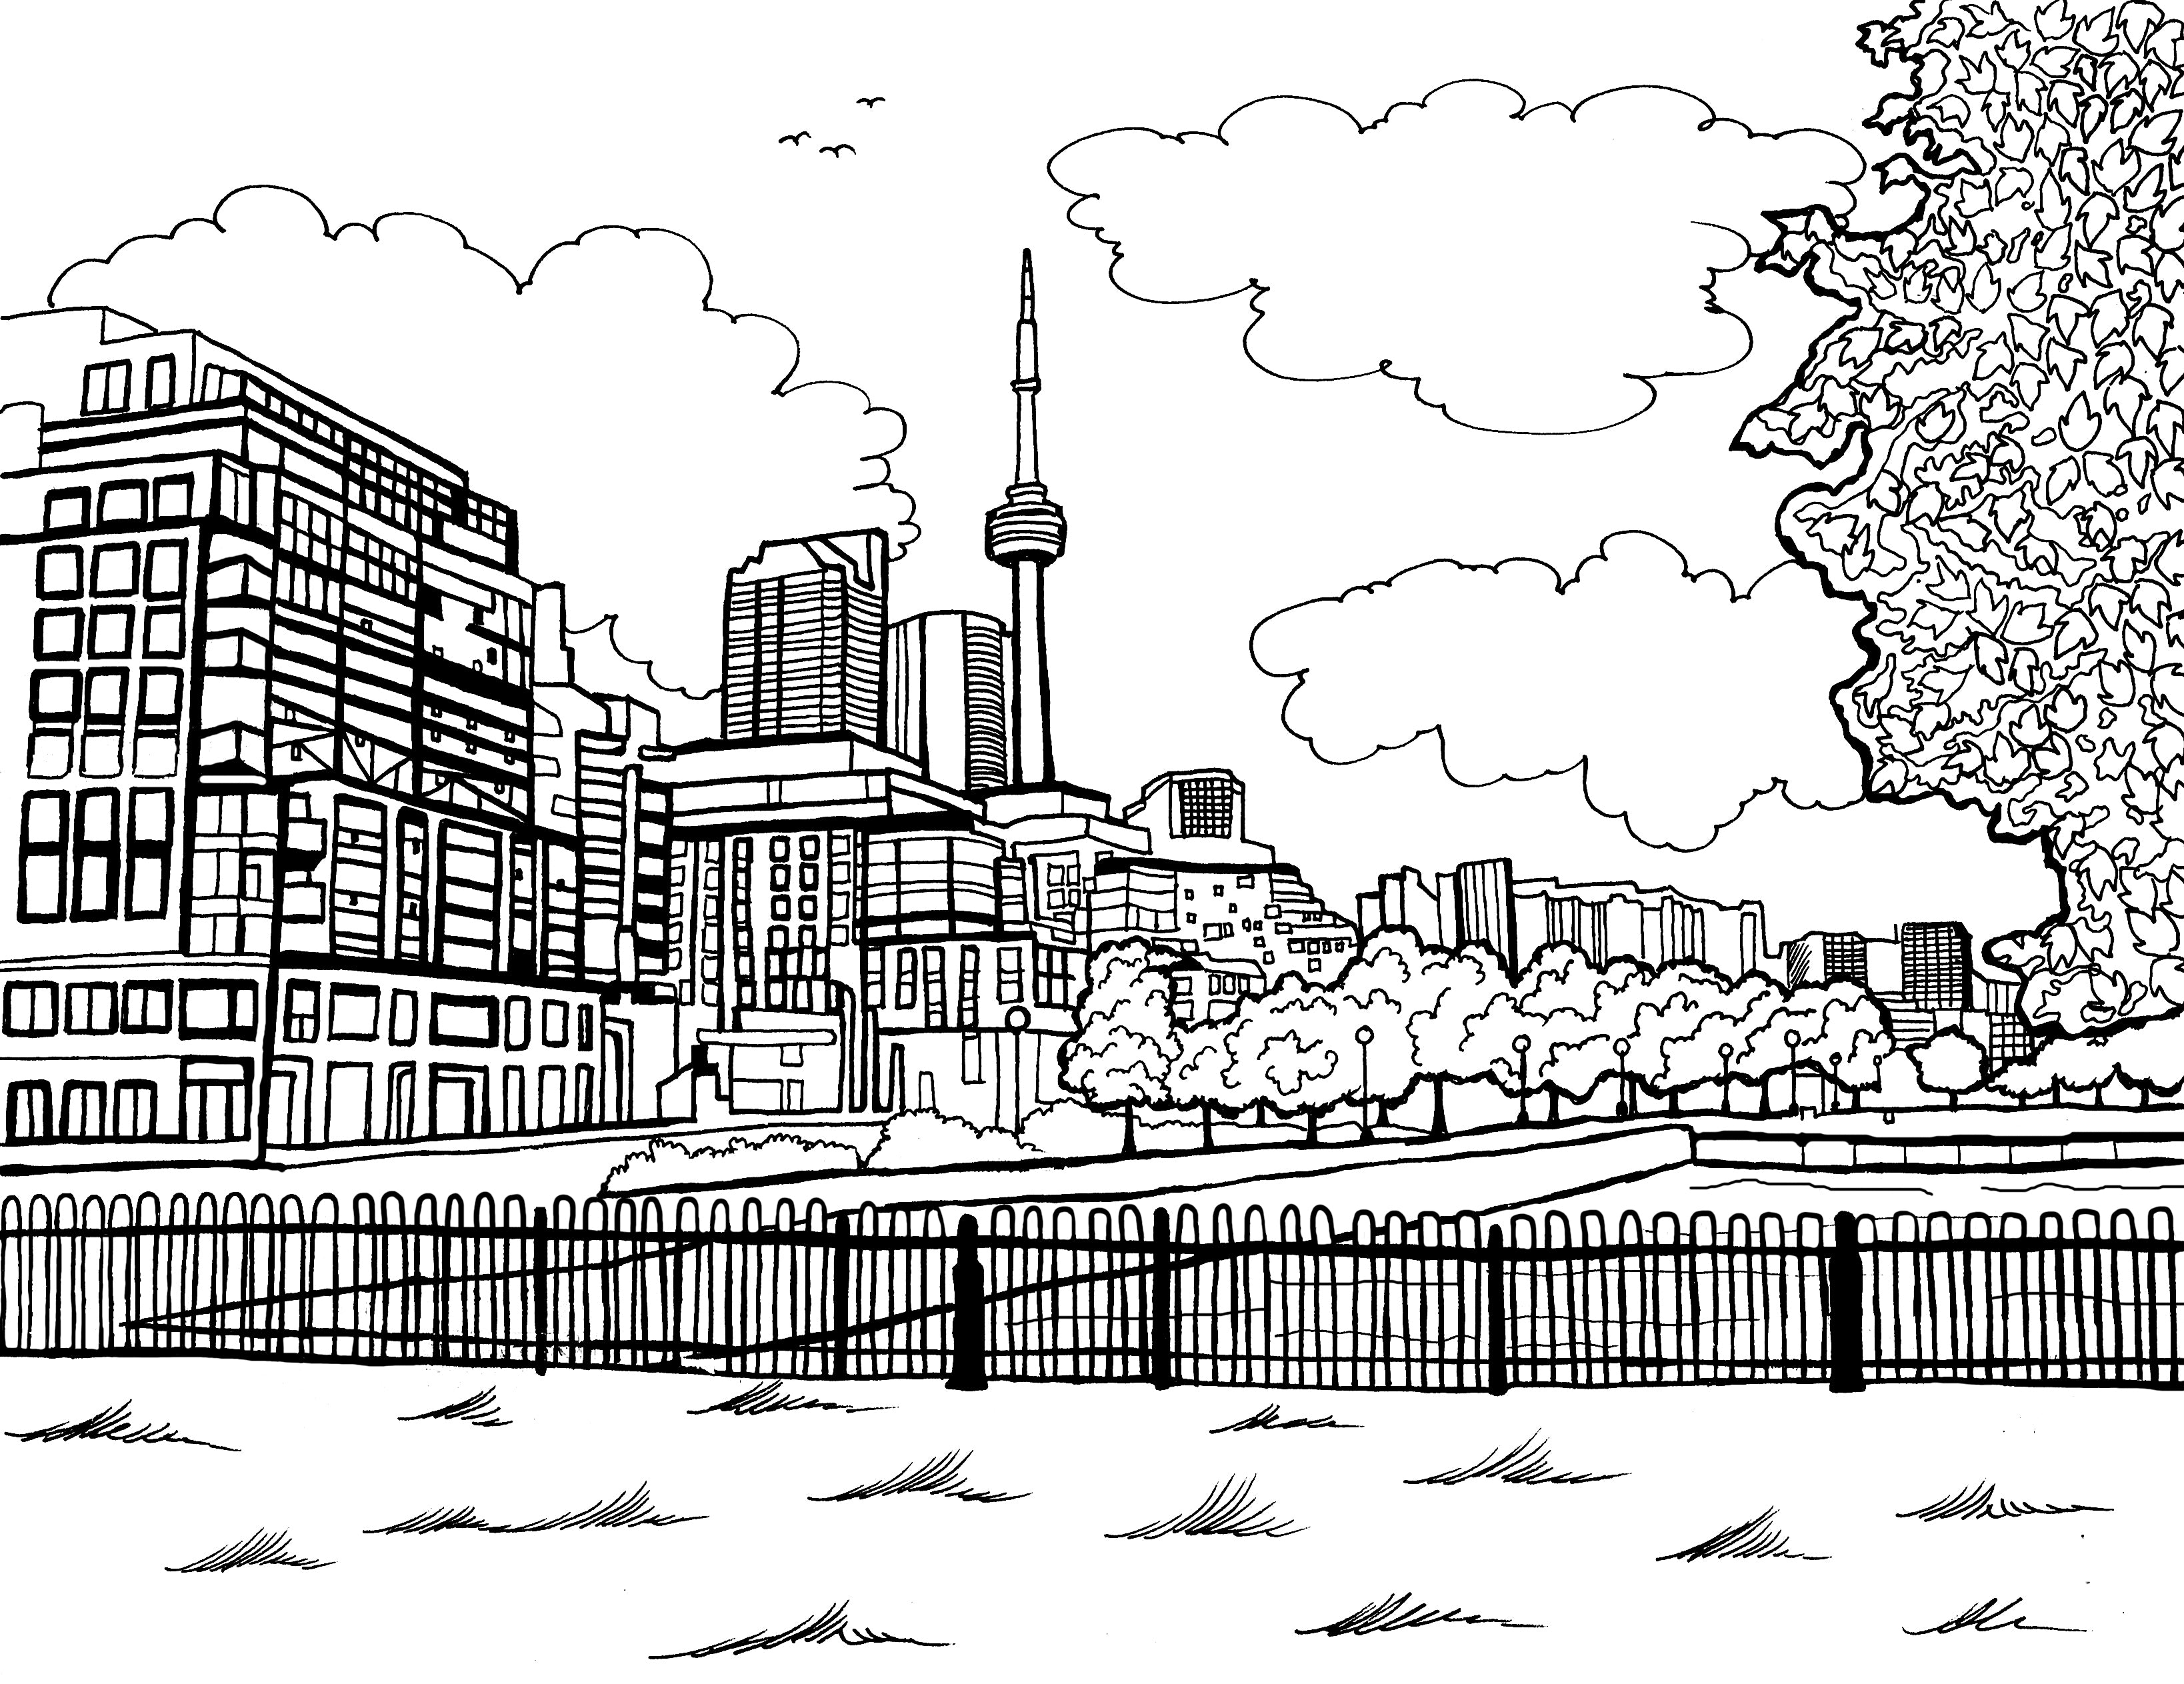 Line drawing for coloring of the Toronto skyline with the iconic CN Tower prominently displayed in the background. The illustration showcases a variety of buildings with diverse architectural styles, from modern skyscrapers to traditional structures. Fluffy cumulus clouds adorn the sky, and a lush, detailed tree occupies the right side of the composition, suggesting a park. In the foreground, a fence runs parallel to a calm body of water with the view of the city of Toronto, CN Tower.:: You-Color